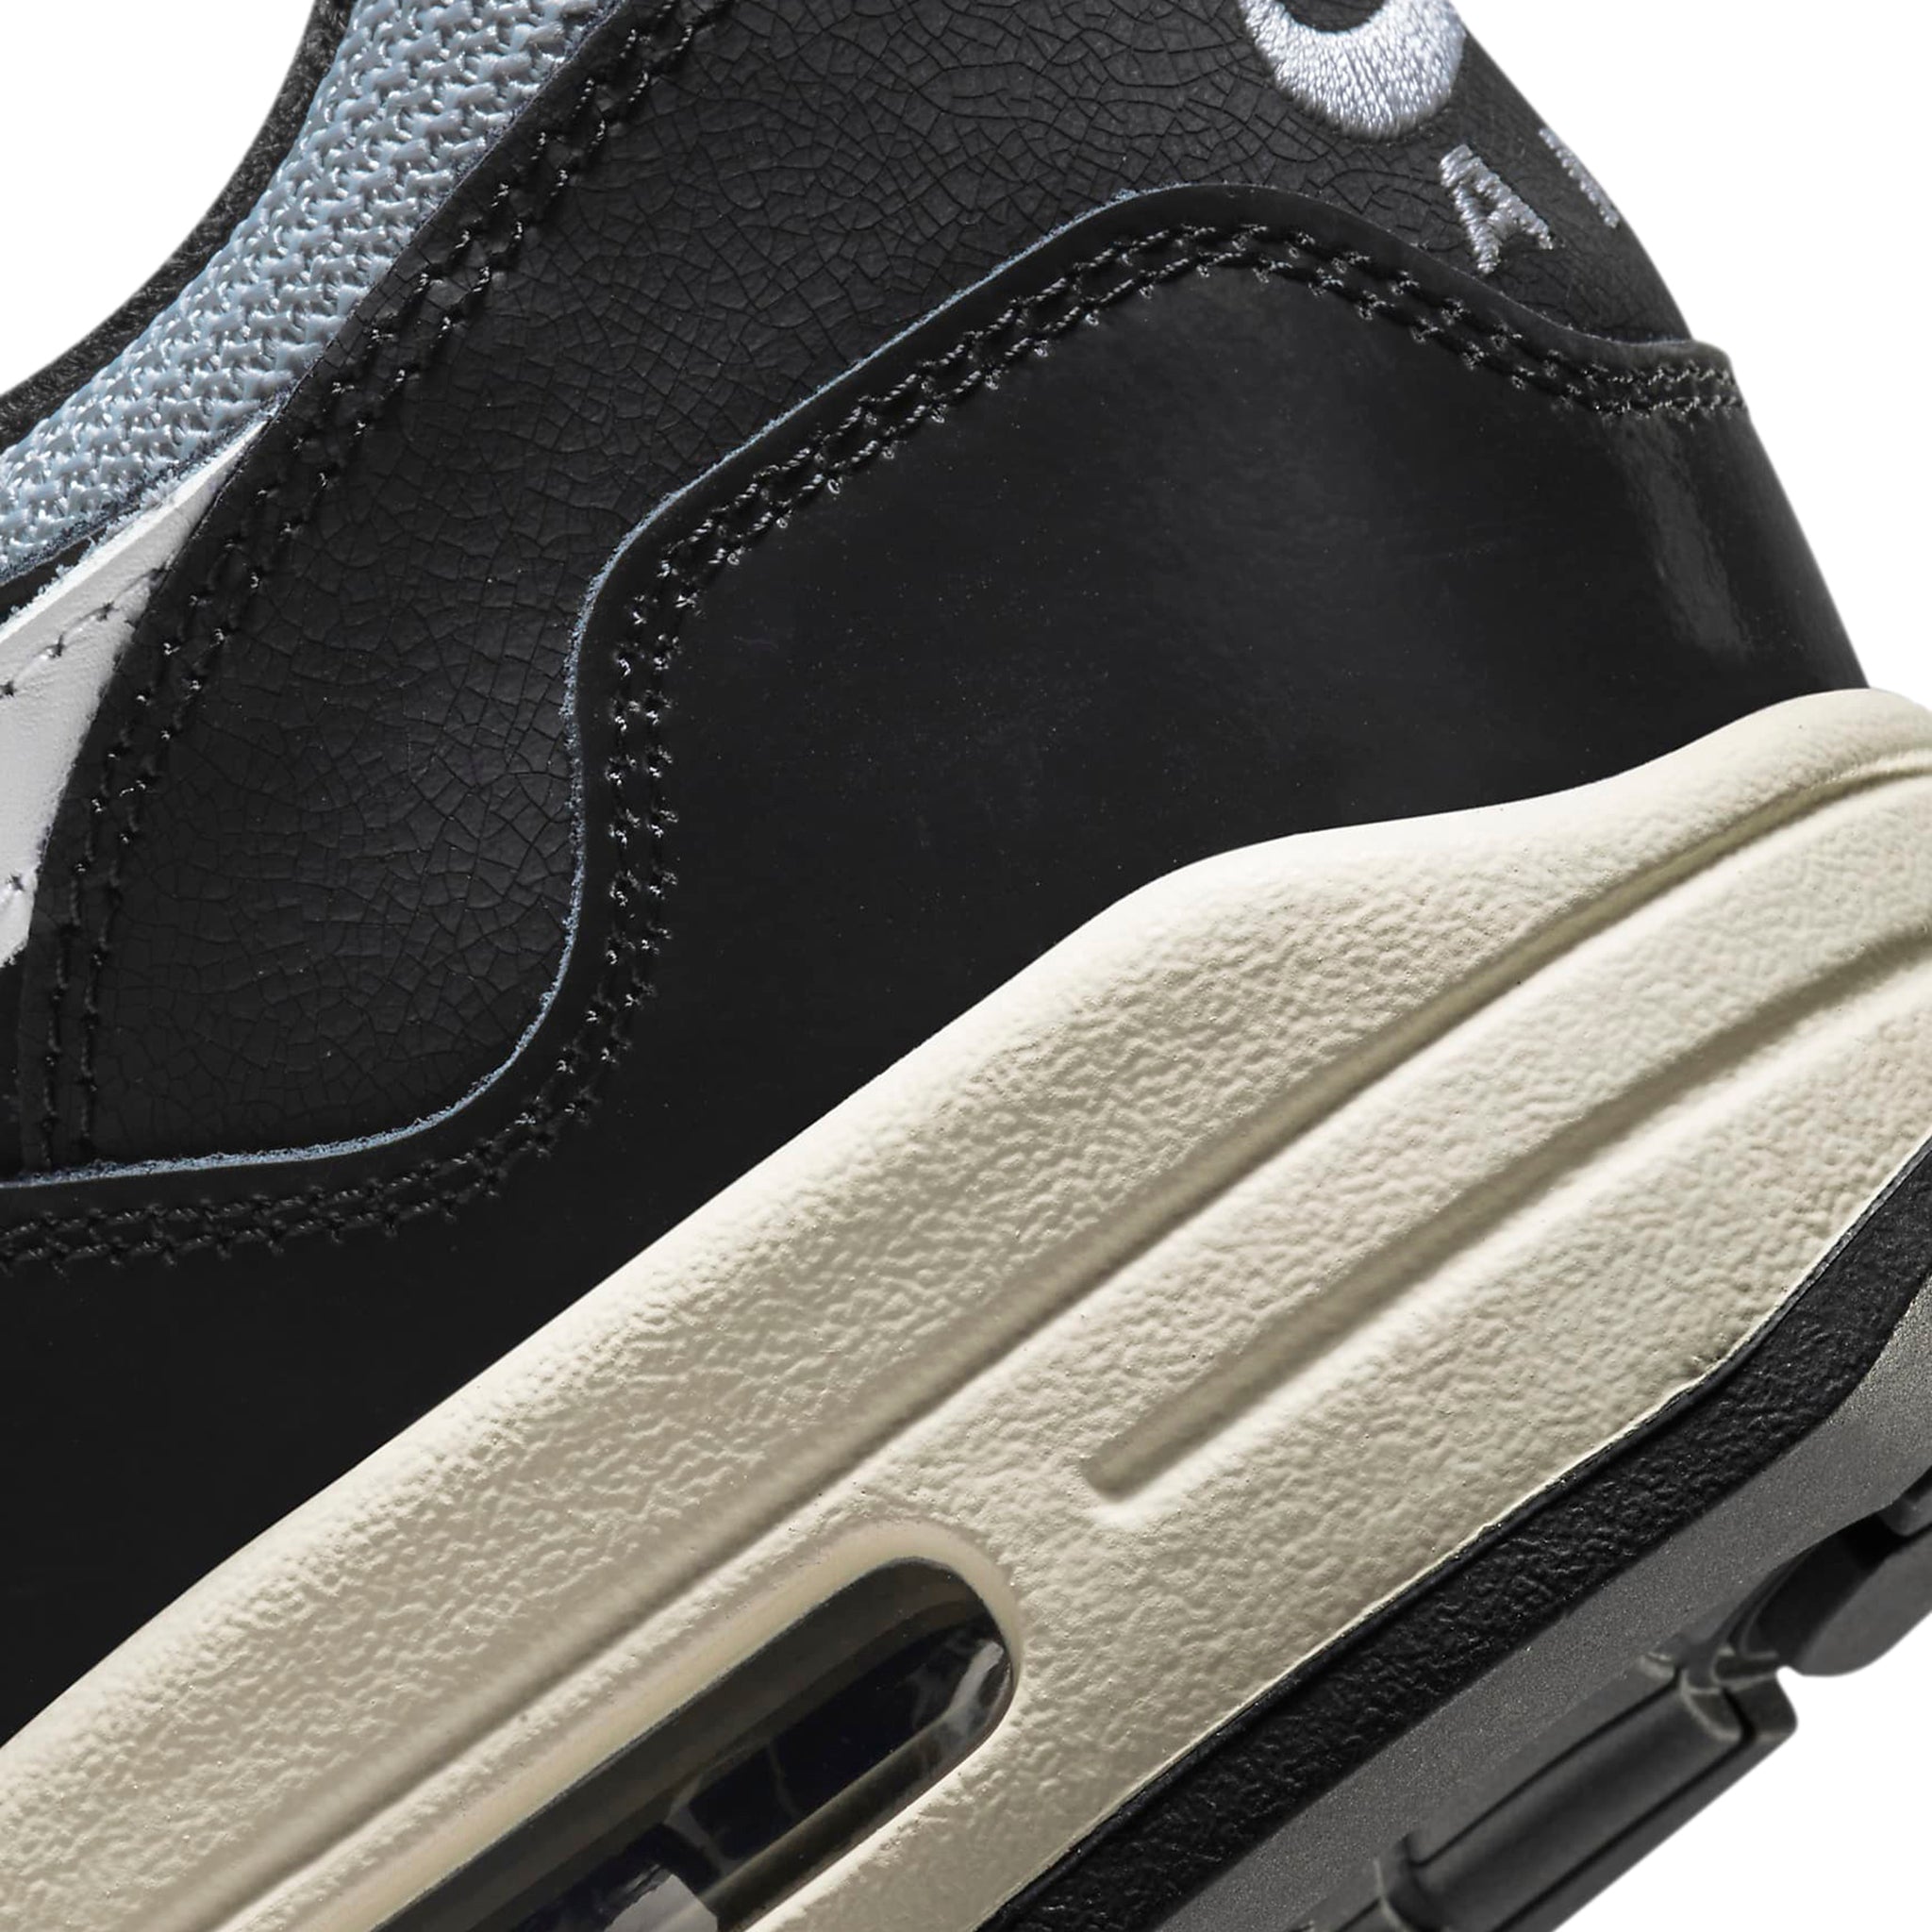 Back view of Nike Air Max 1 Patta Waves Black (With Bracelet) DQ0299-001